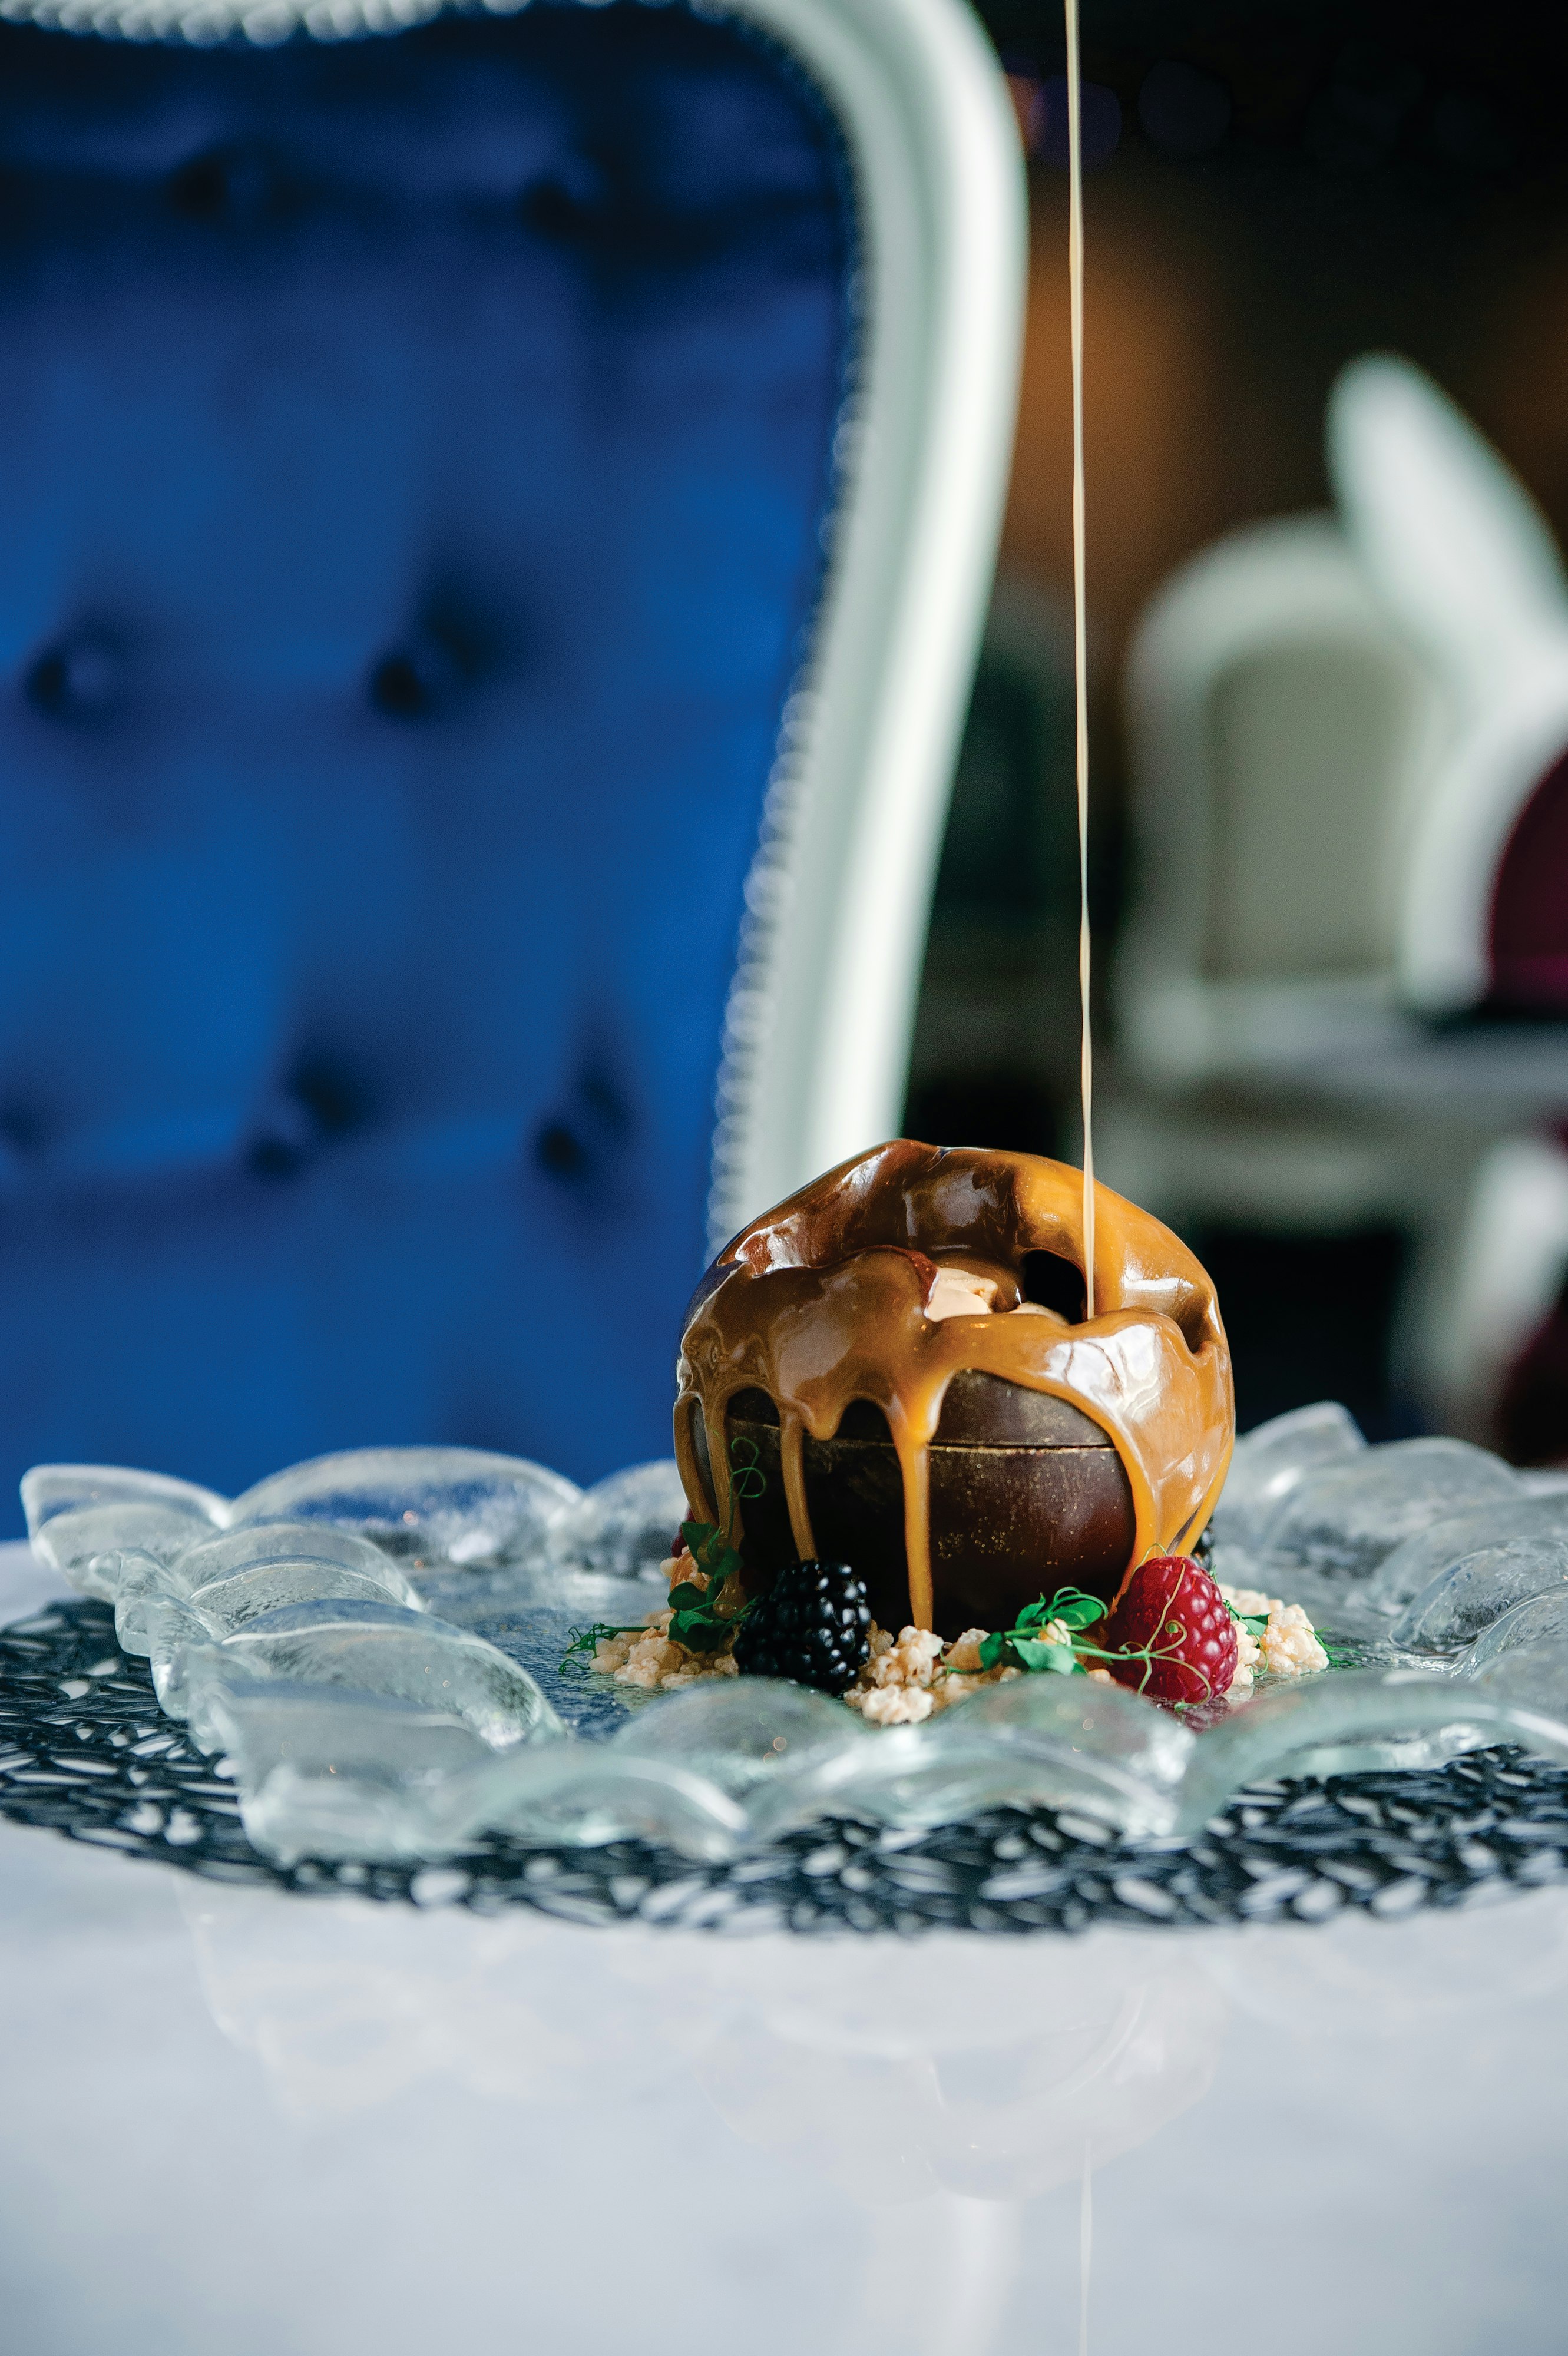 Symphony of the Seas, SY, Dining, Miss Marzipan, Food, specialty dining, wonderland, imaginative cuisine, dreams, dessert, The World, peanut butter ganache, chocolate mousse, salted caramel ice cream, sauce pouring into dish from above frame, melting, sweets, berry garnish,